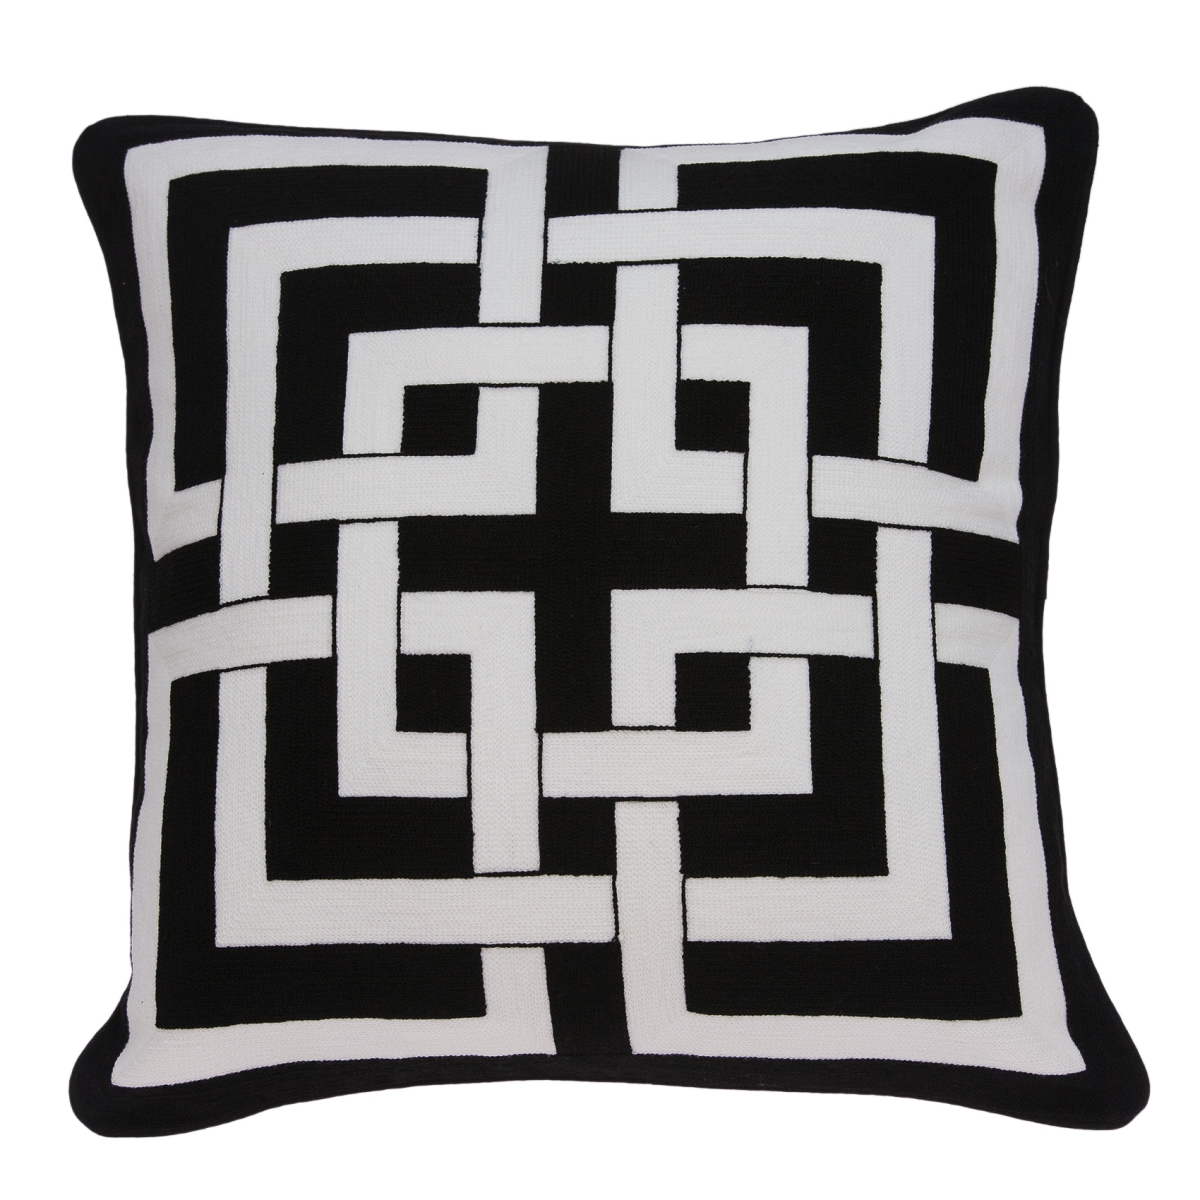 Pila11001c Abali Black & White Square Transitional Pillow Cover - 20 X 20 X 0.5 In.